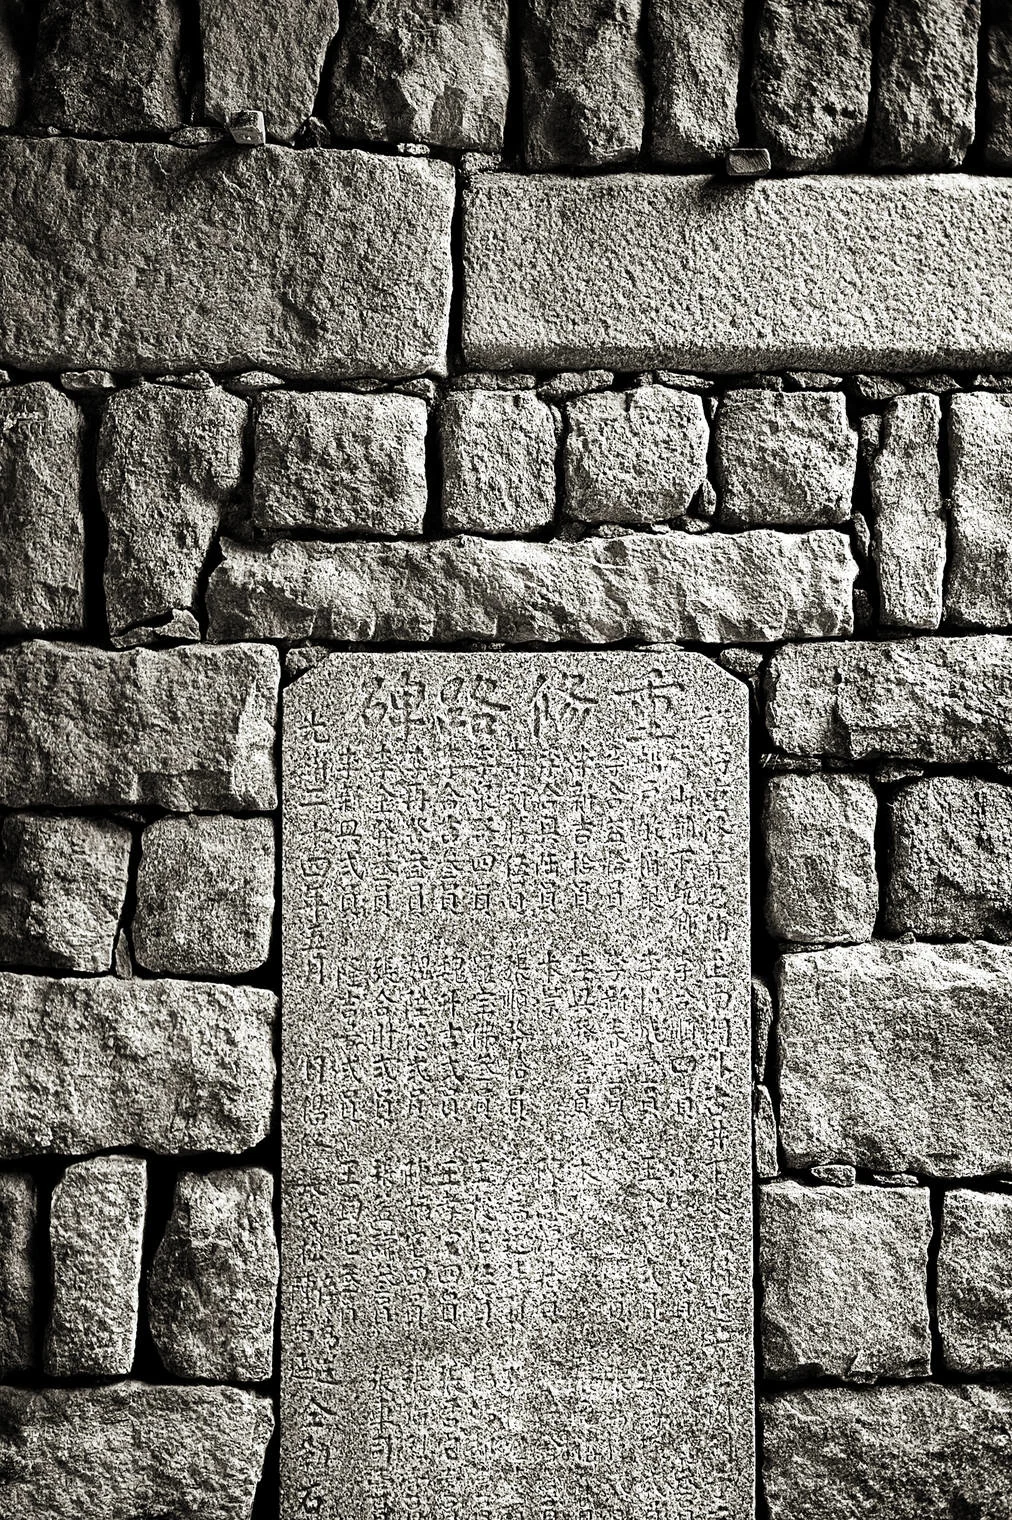 granite wall with inscription